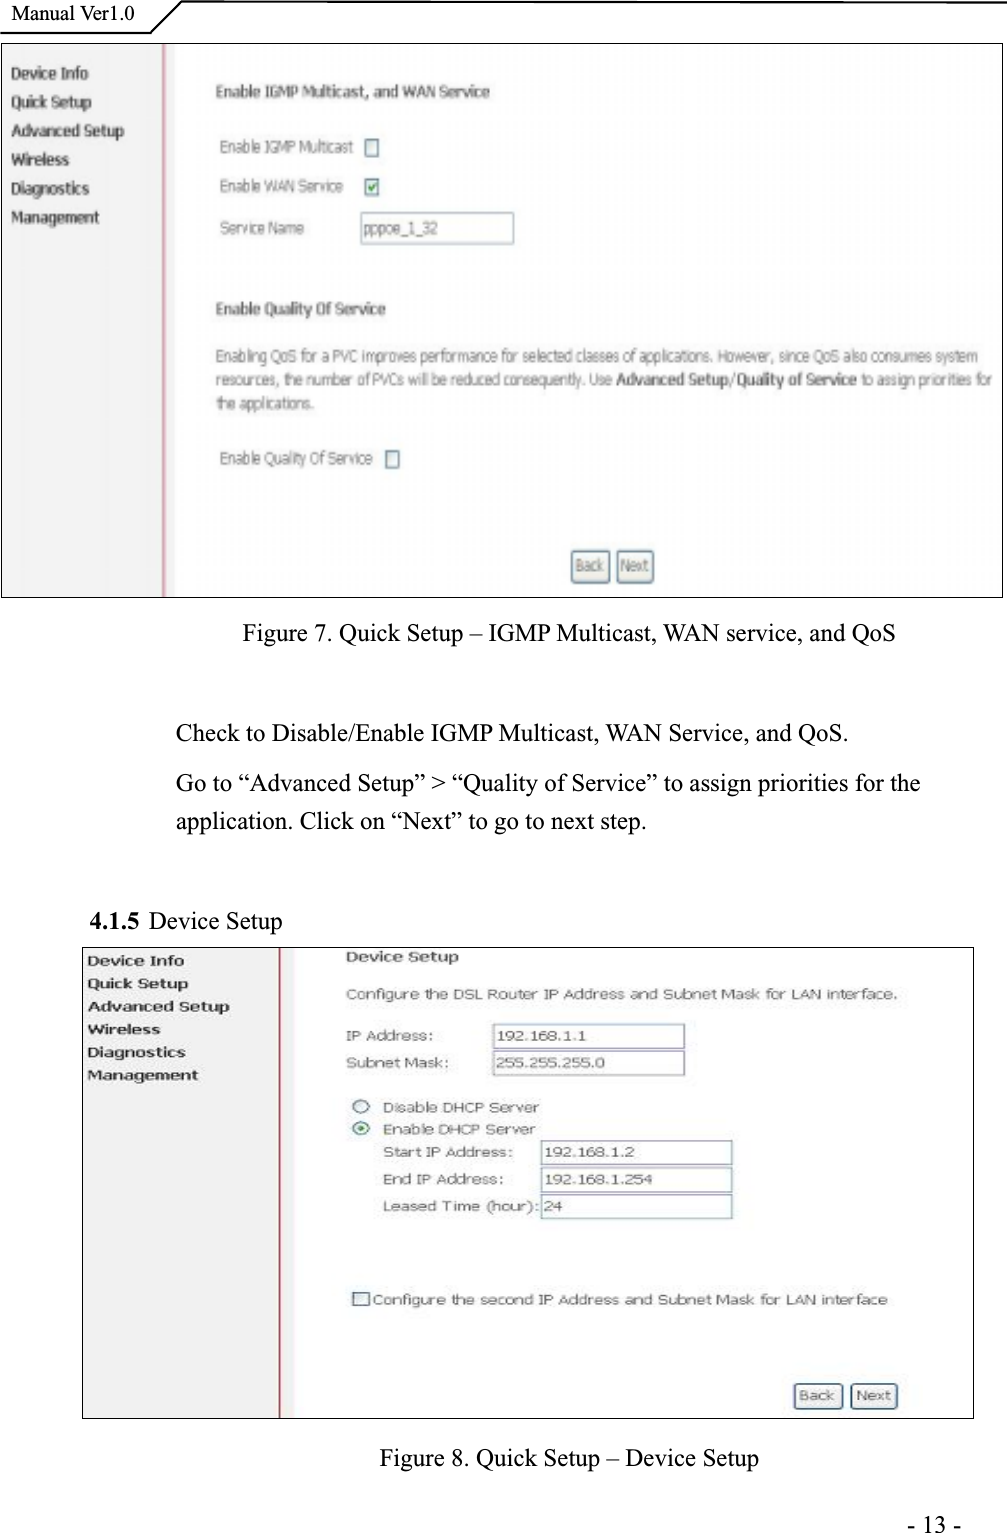  Manual Ver1.0Figure 7. Quick Setup – IGMP Multicast, WAN service, and QoSCheck to Disable/Enable IGMP Multicast, WAN Service, and QoS. Go to “Advanced Setup” &gt; “Quality of Service” to assign priorities for the application. Click on “Next” to go to next step. 4.1.5 Device Setup Figure 8. Quick Setup – Device Setup                                                                      -13-